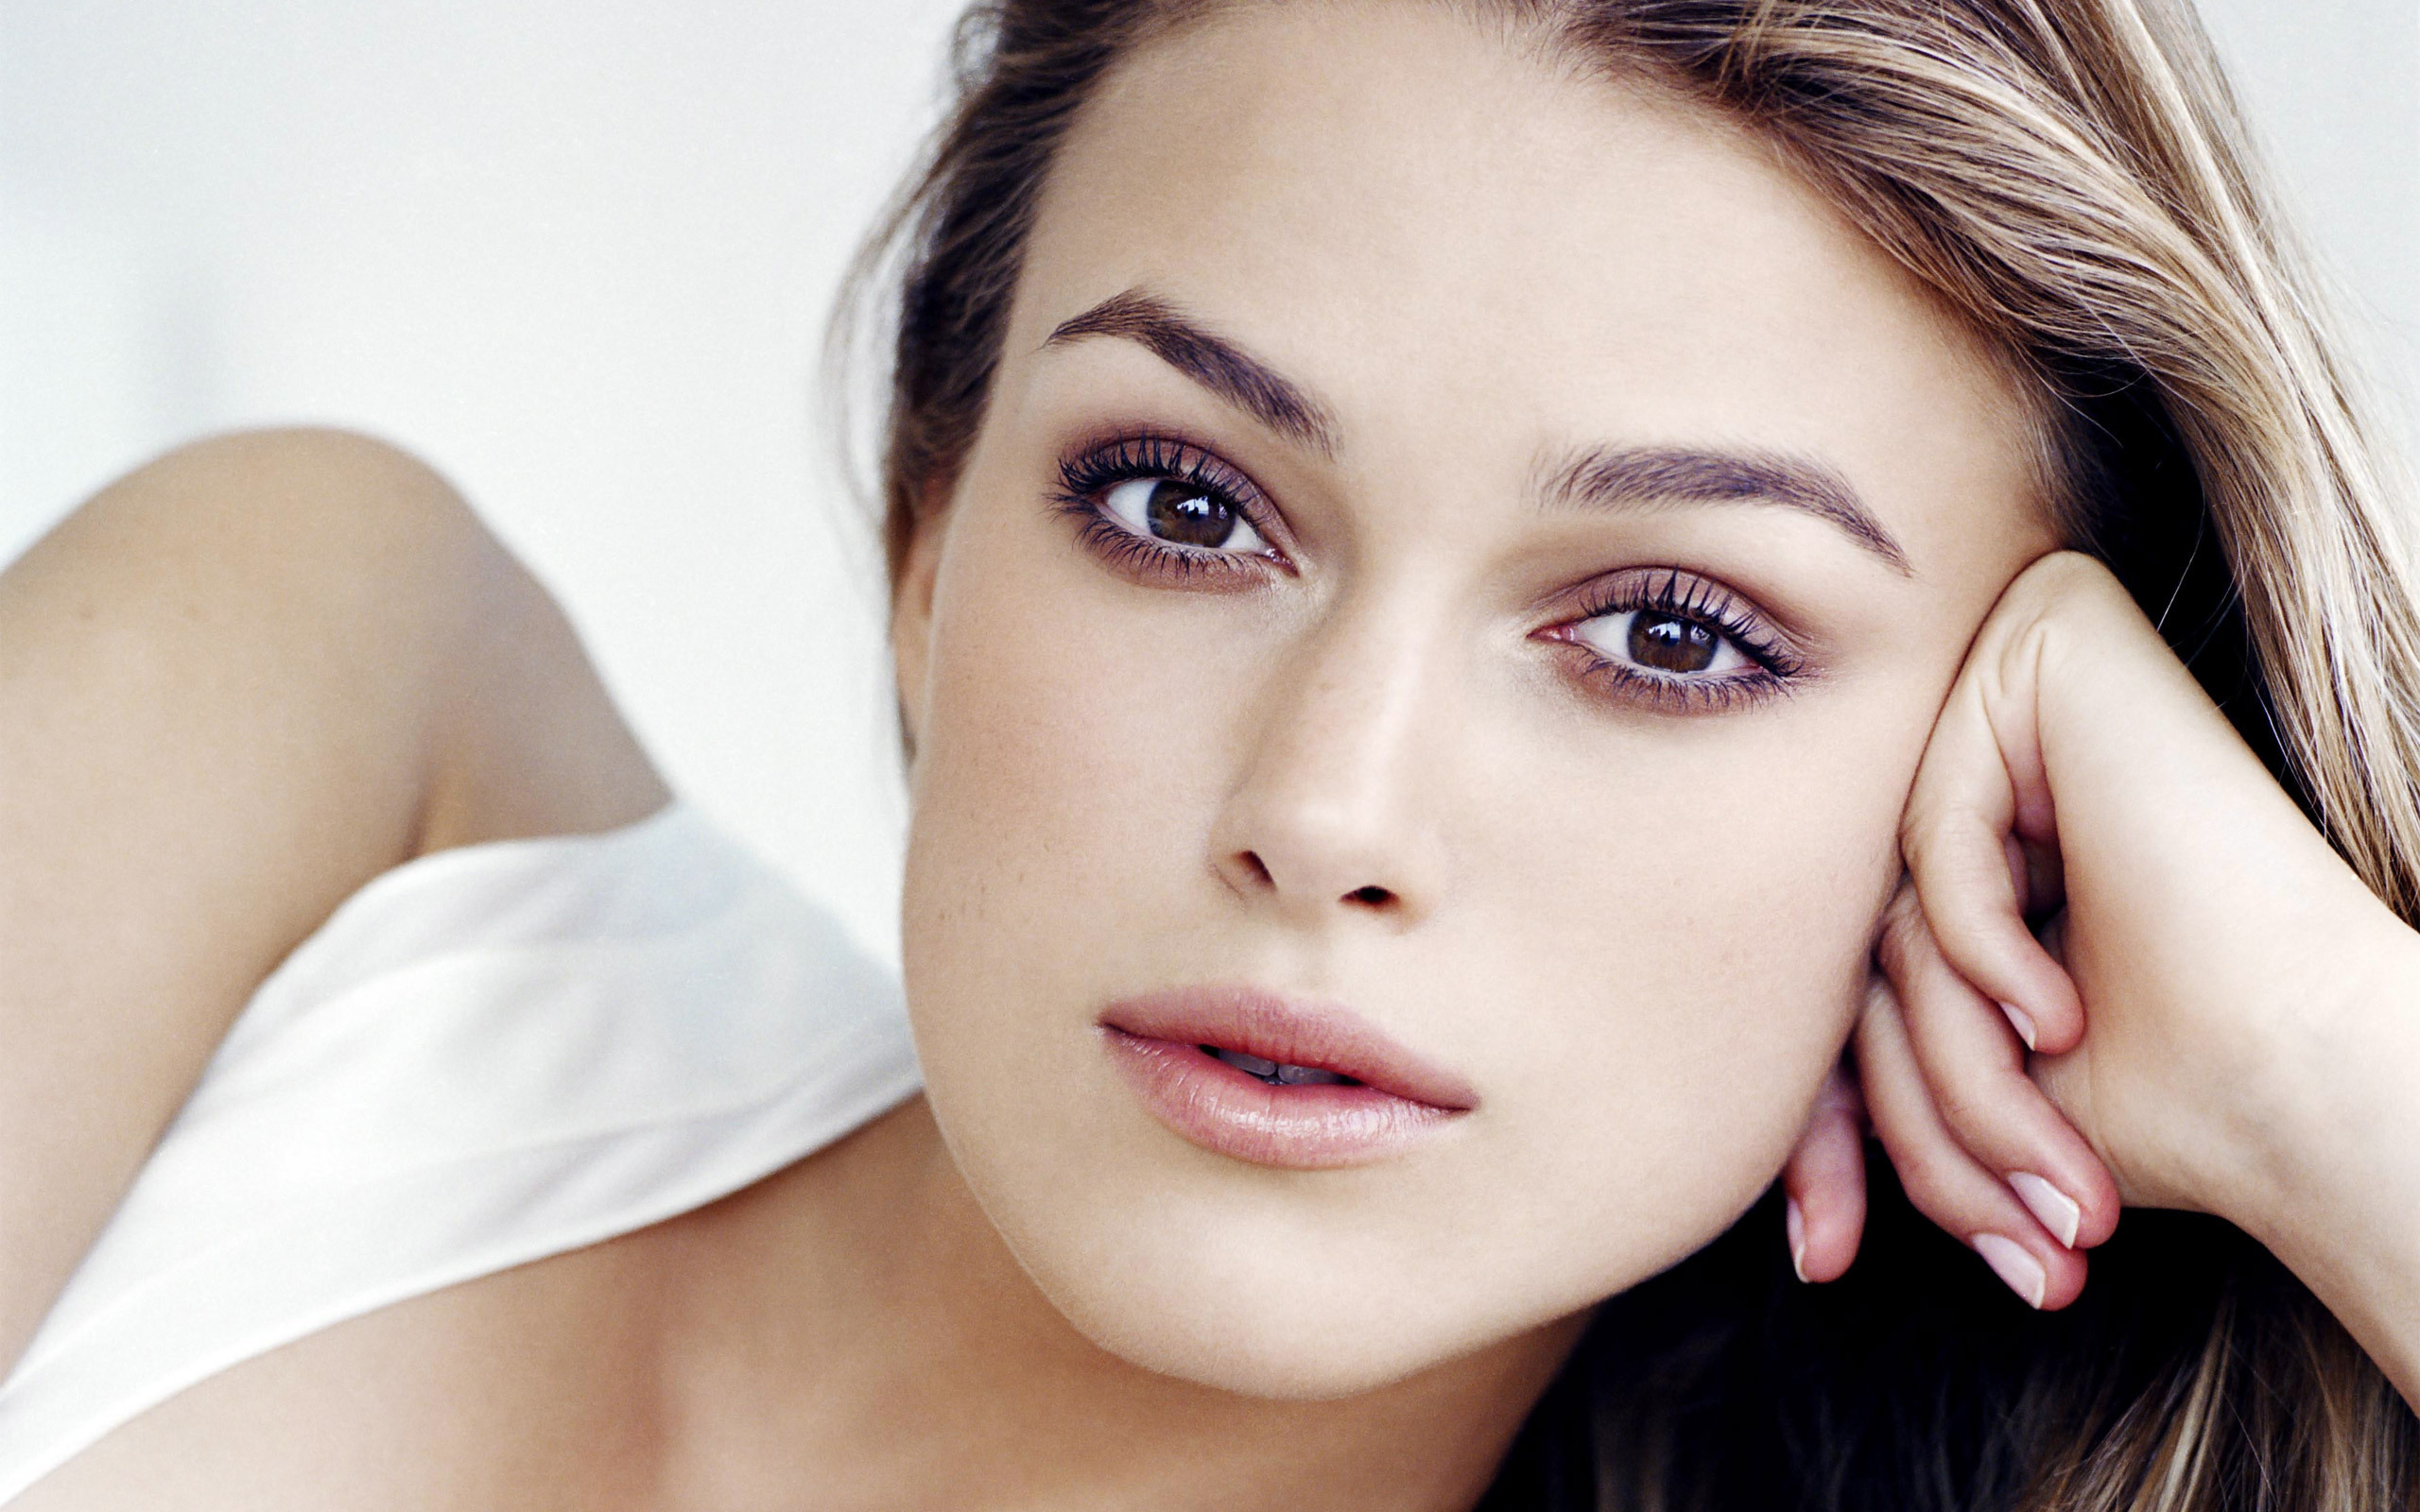 Wallpapers Female Face Faces Actress Keira Knightley Beautiful ...